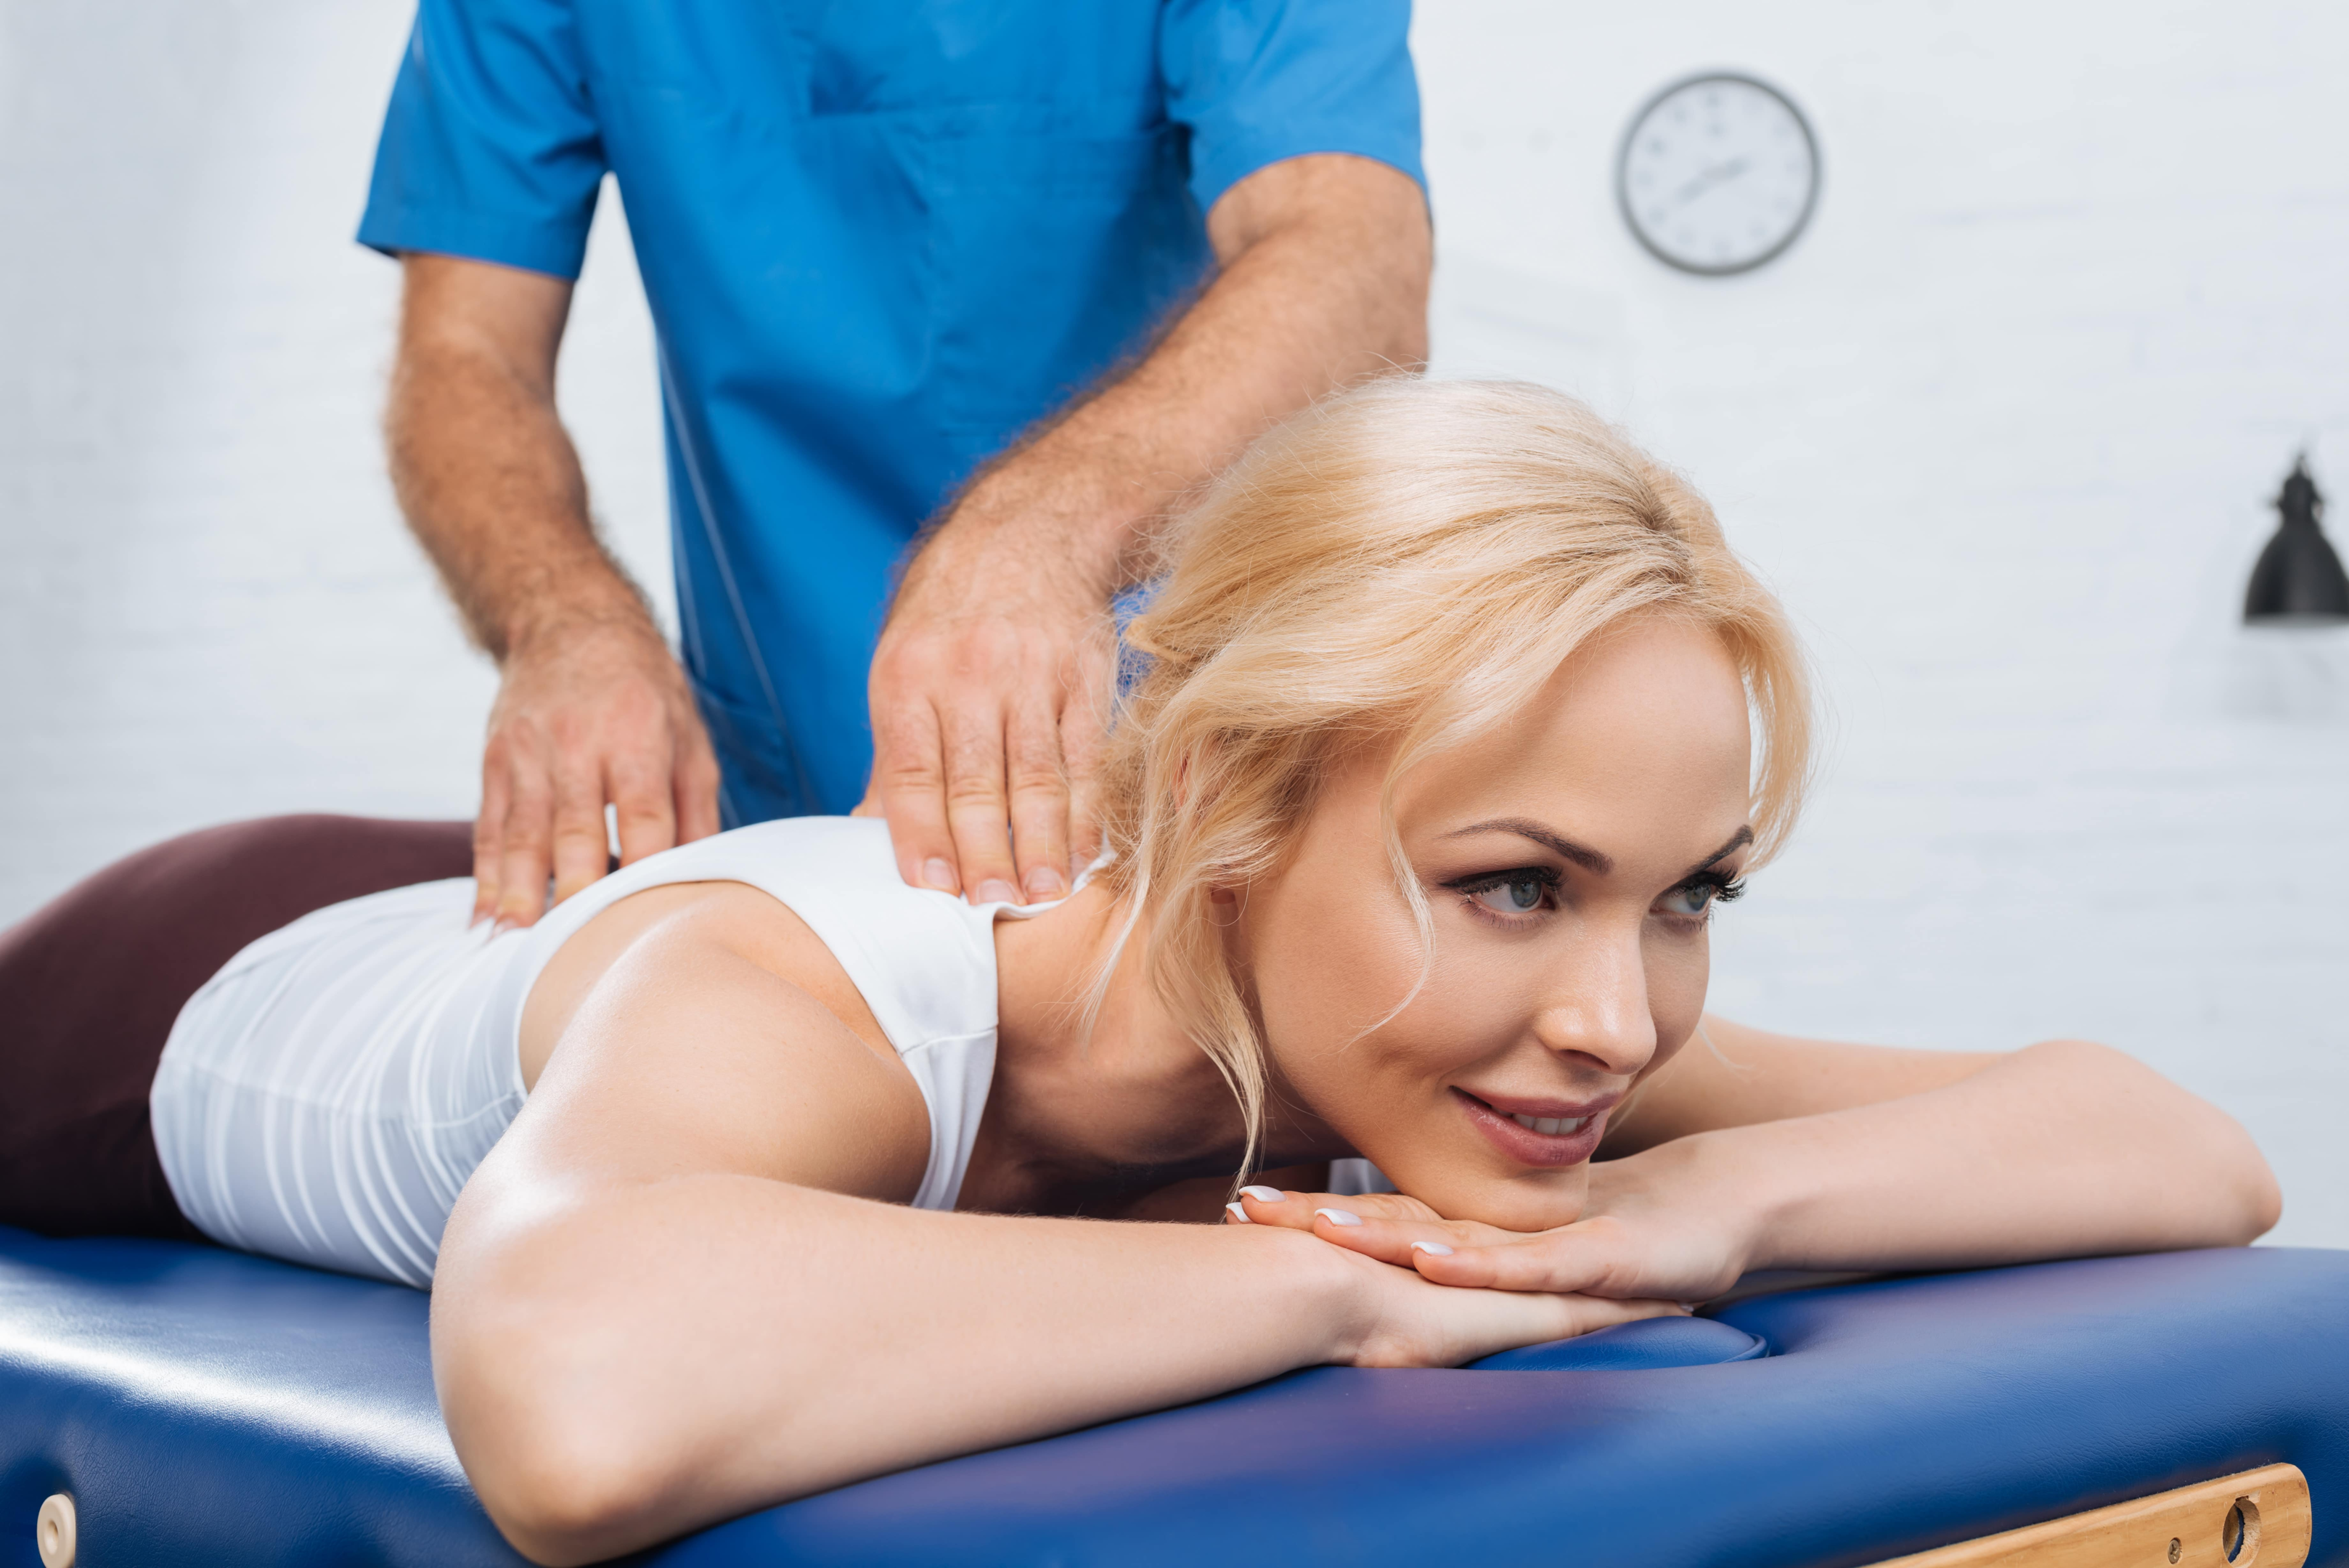 Woman receiving treatment for her lower back muscles from a doctor. Massage and chiropractic provide effective care.